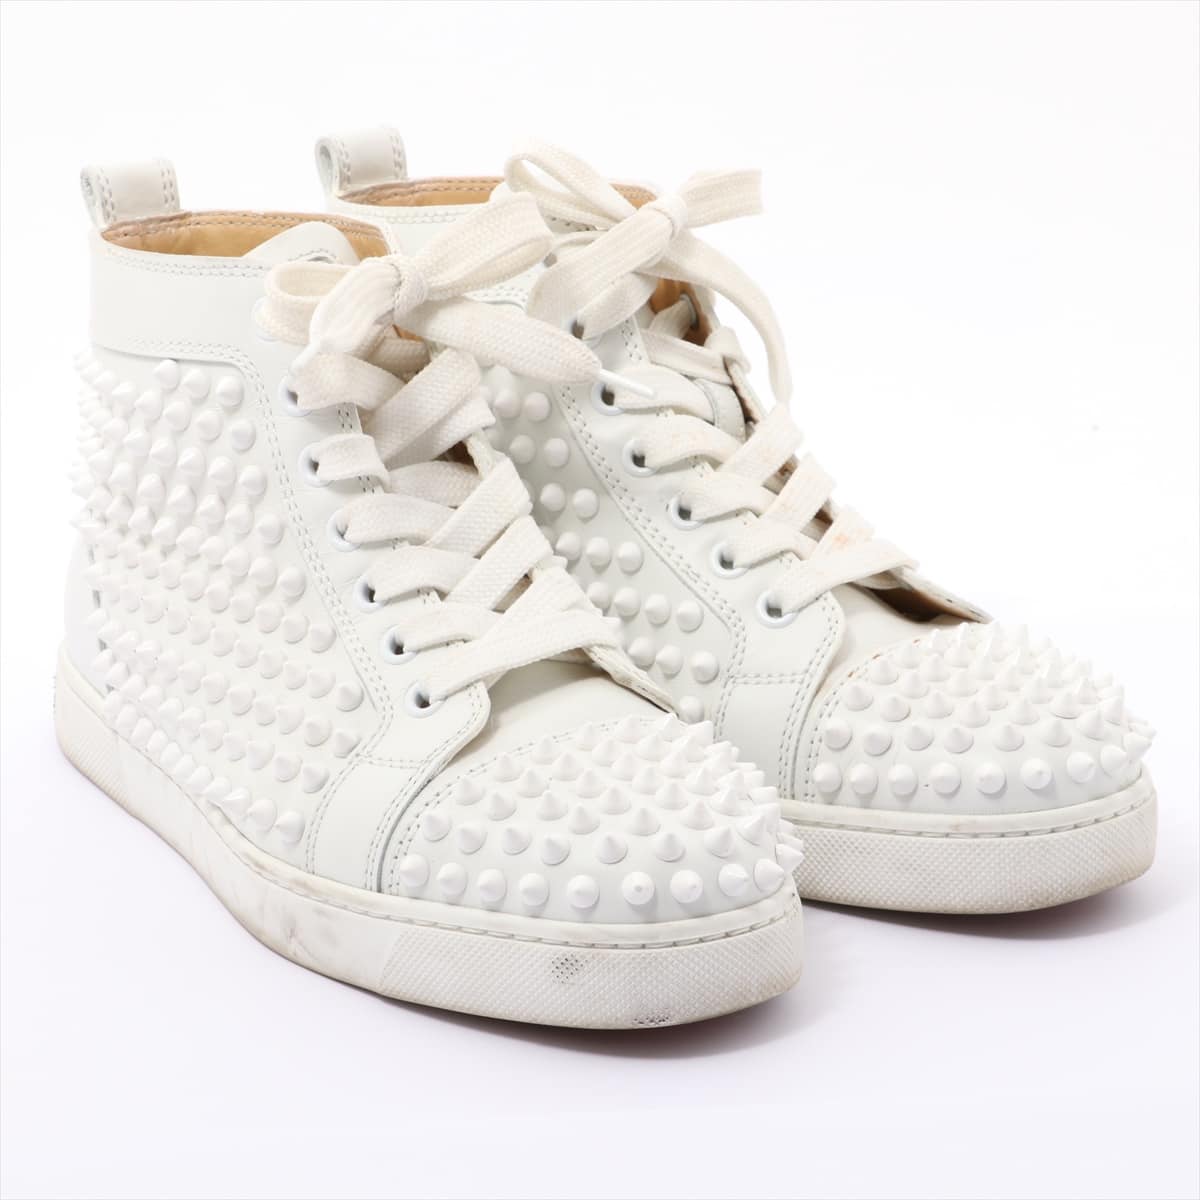 Christian Louboutin Lewis Spike Leather High-top Sneakers 35 Ladies' White